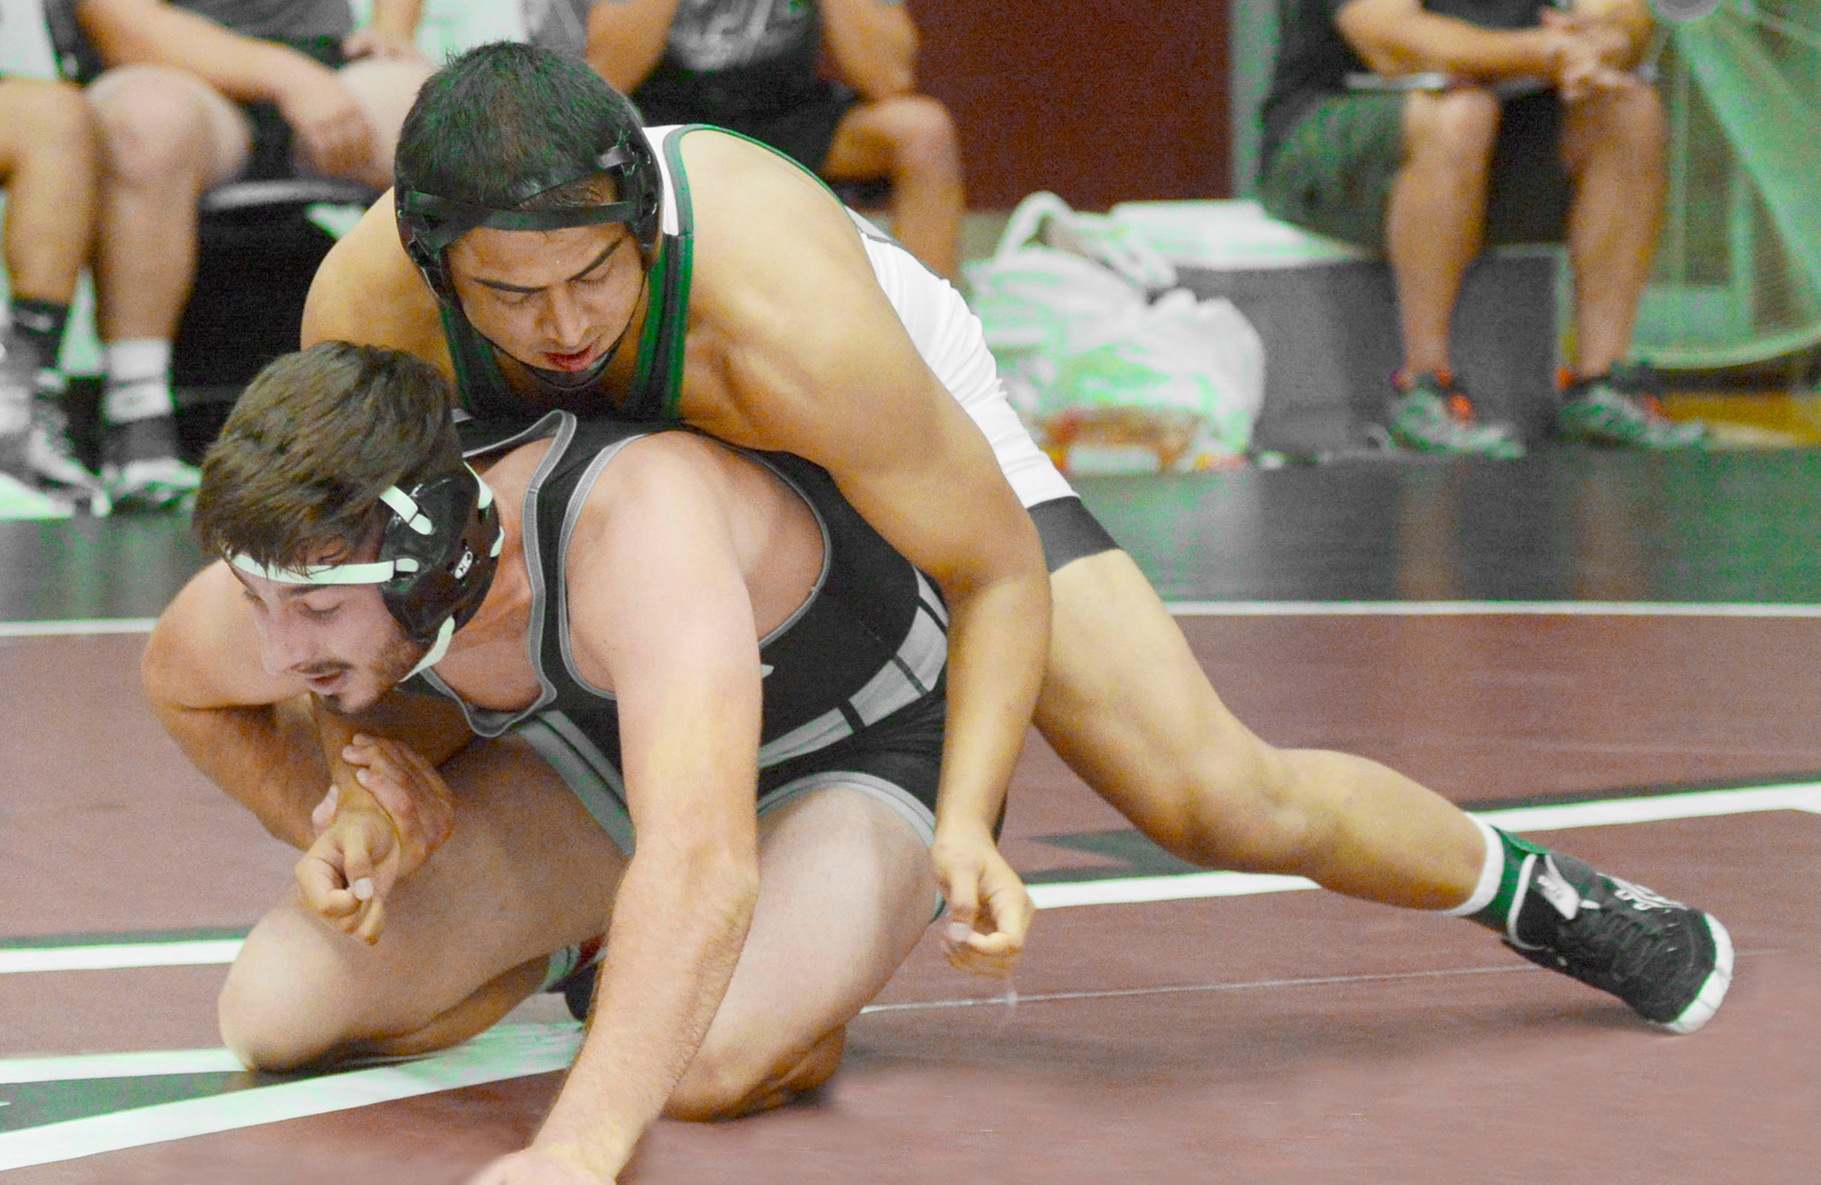 165-pound sophomore Rodrigo Magallon is 3-3 overall after the East Los Angeles College wrestlers lost 27-24 to Lassen College in the West Hills Duals, Sept. 21. (Photo by Tadzio Garcia)